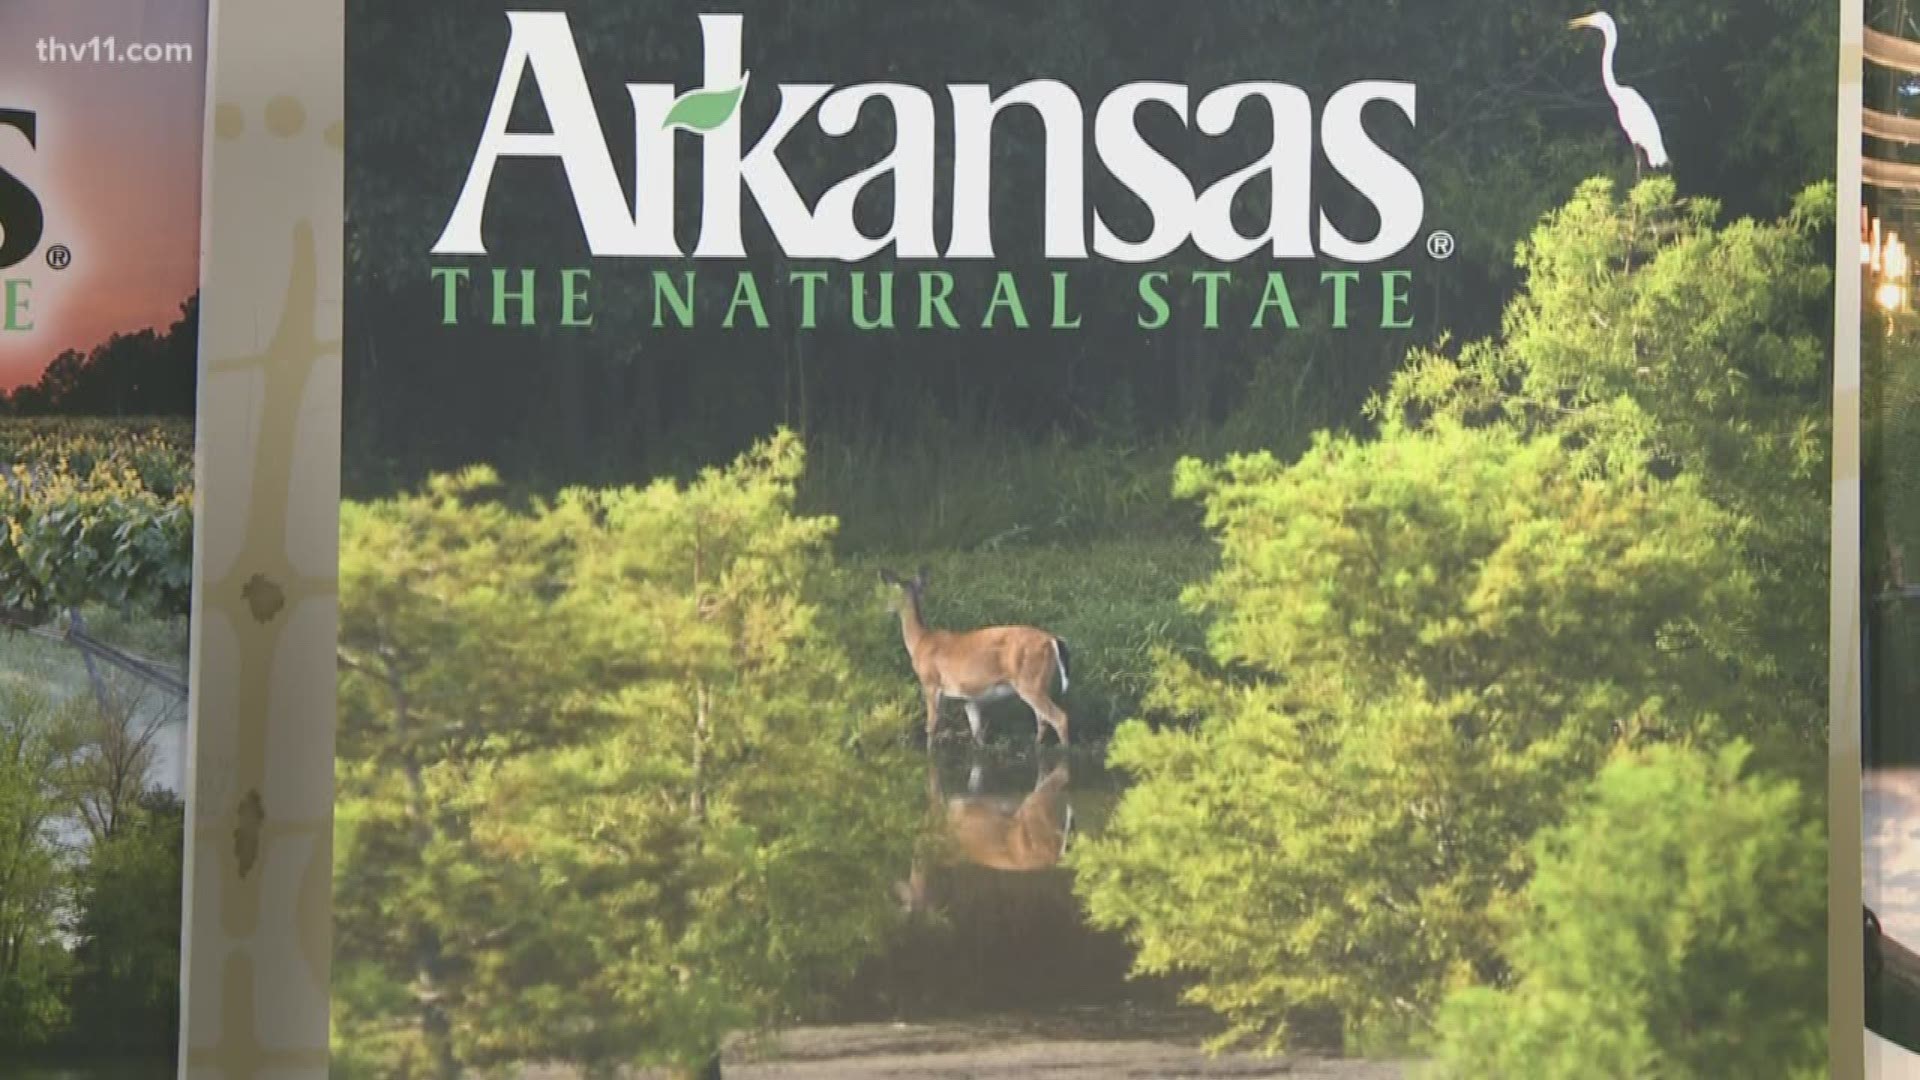 Tourism brings millions of dollars in revenue to Arkansas year in and year out.